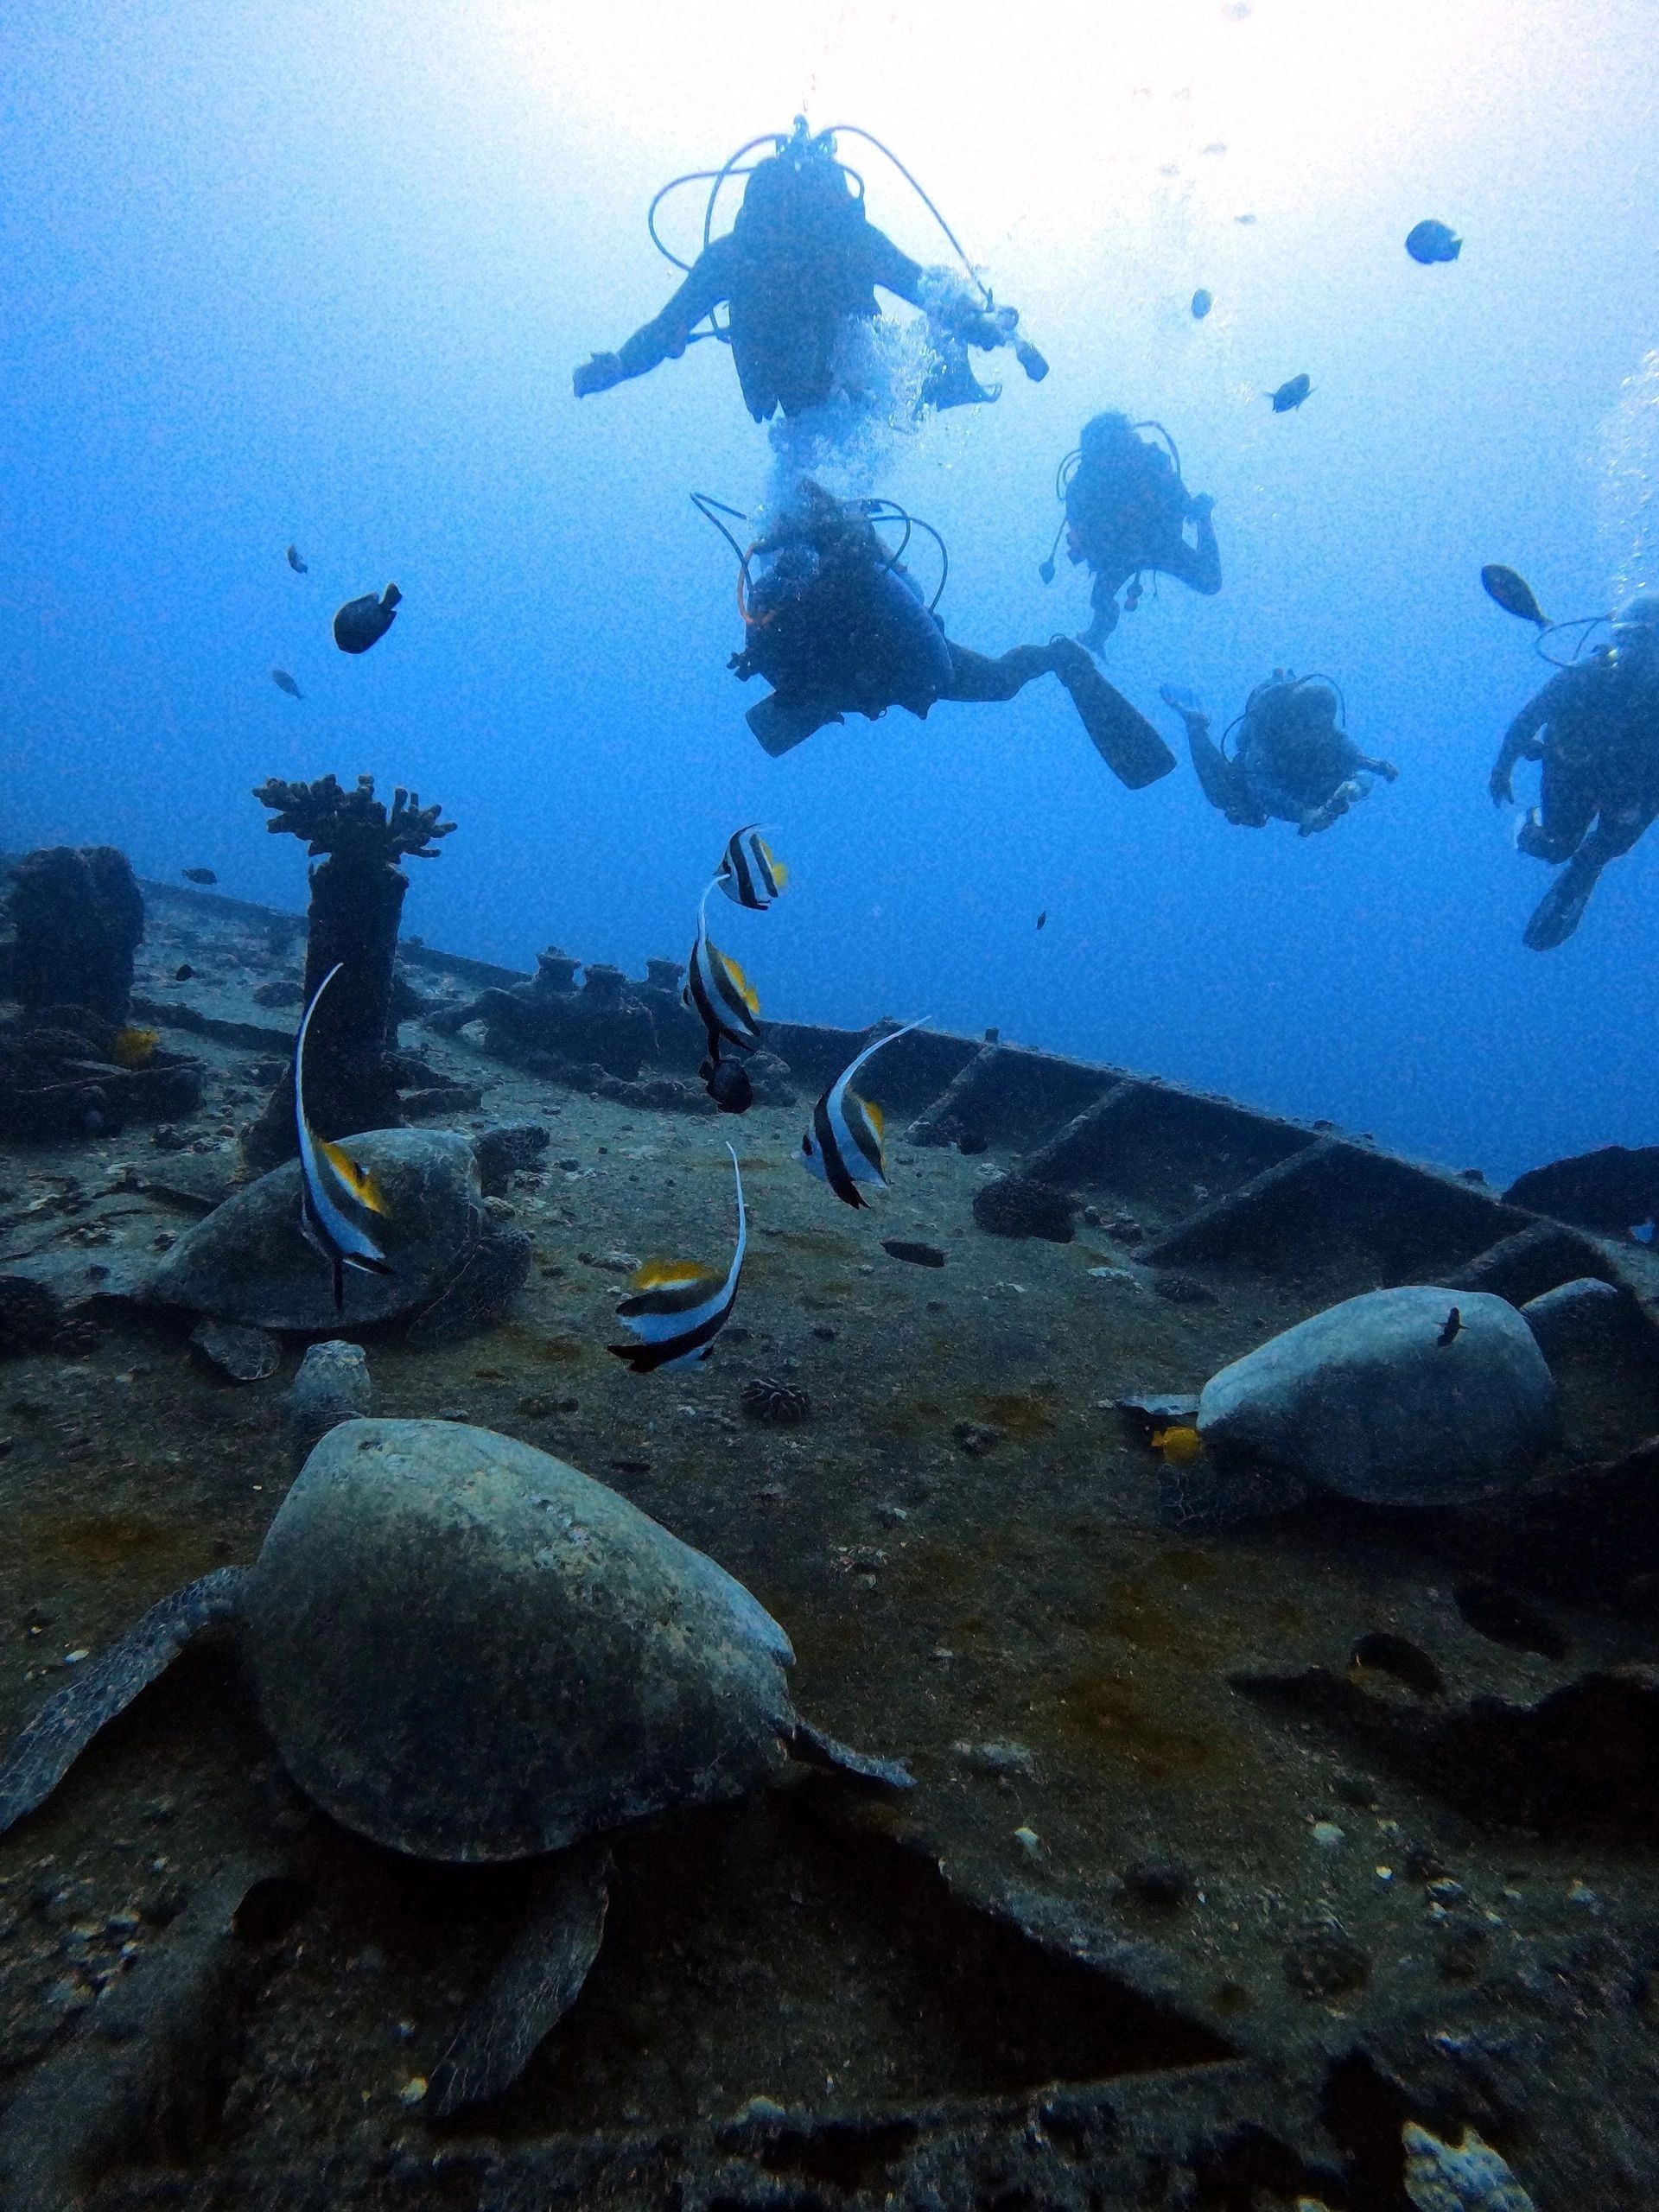 PADI Advanced Open Water Divers check out a wreck dive in Honolulu